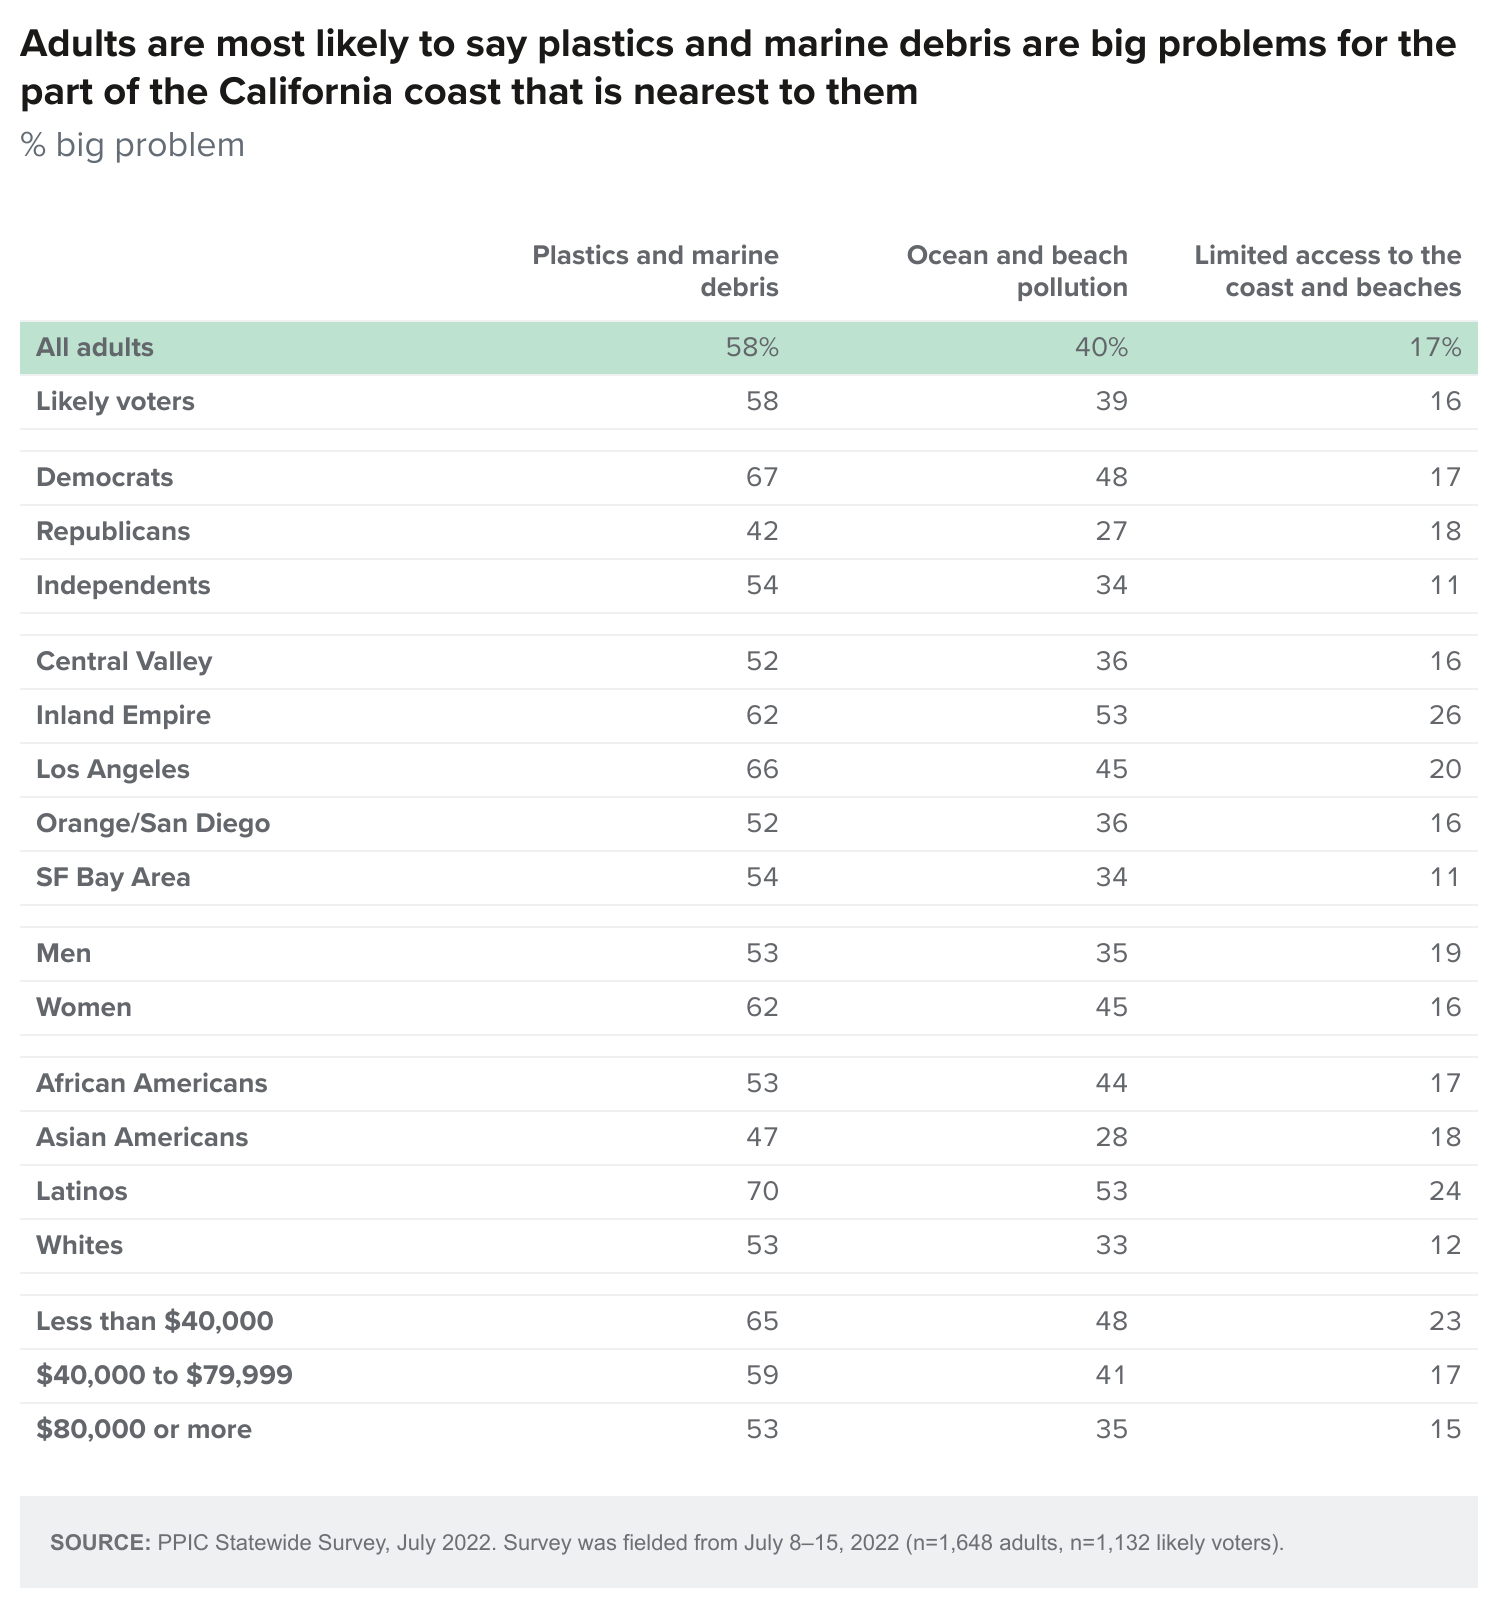 table - Adults are most likely to say plastics and marine debris are big problems for the part of the California coast that is nearest to them